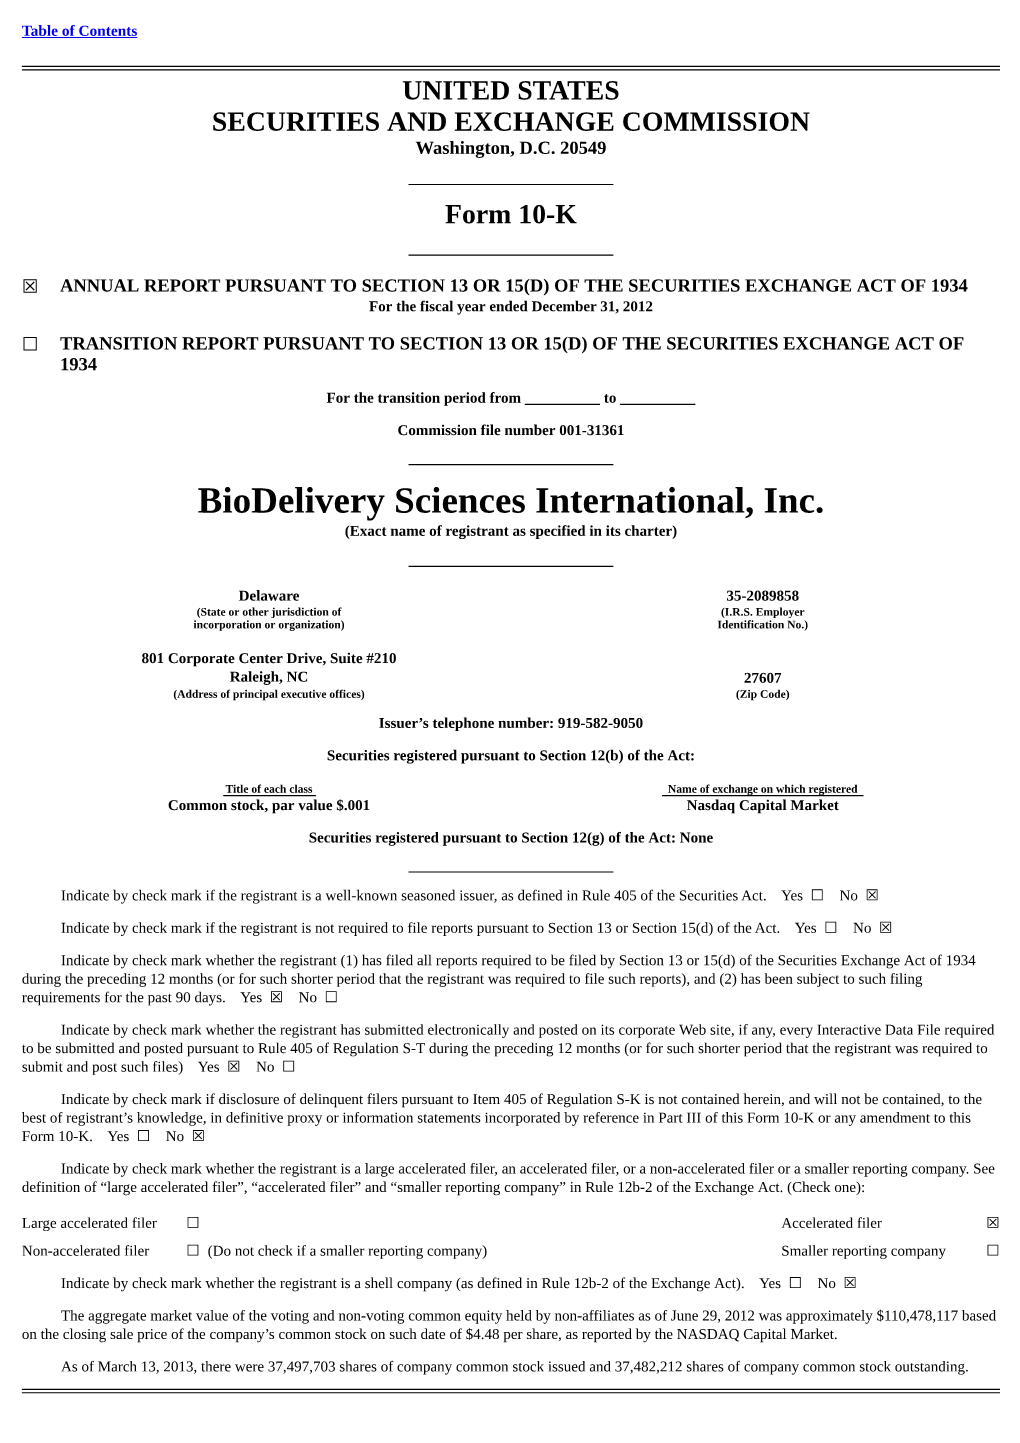 Biodelivery Sciences International, Inc. (Exact Name of Registrant As Specified in Its Charter)